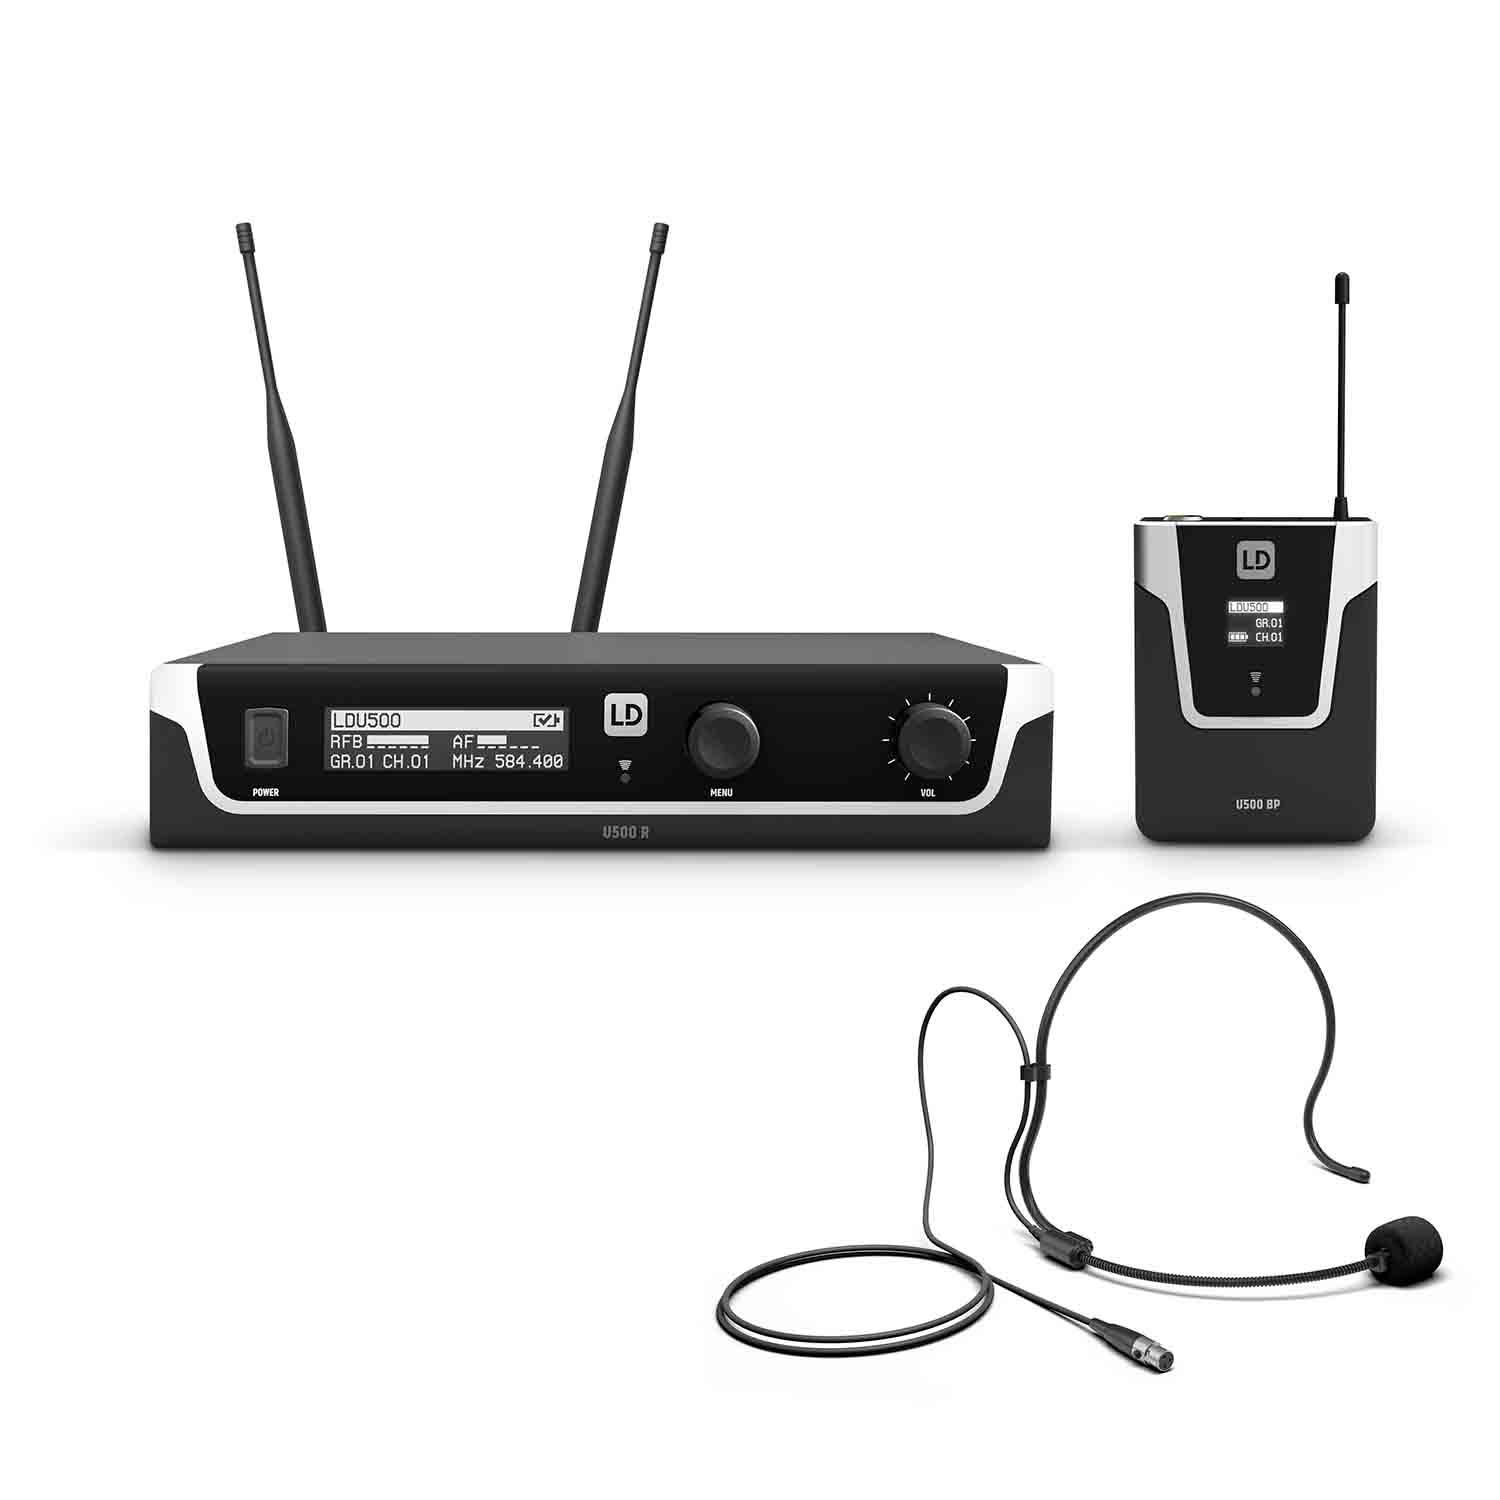 LD Systems U505 BPH Wireless Microphone System with Bodypack and Headset (584 – 608 MHz) - Hollywood DJ